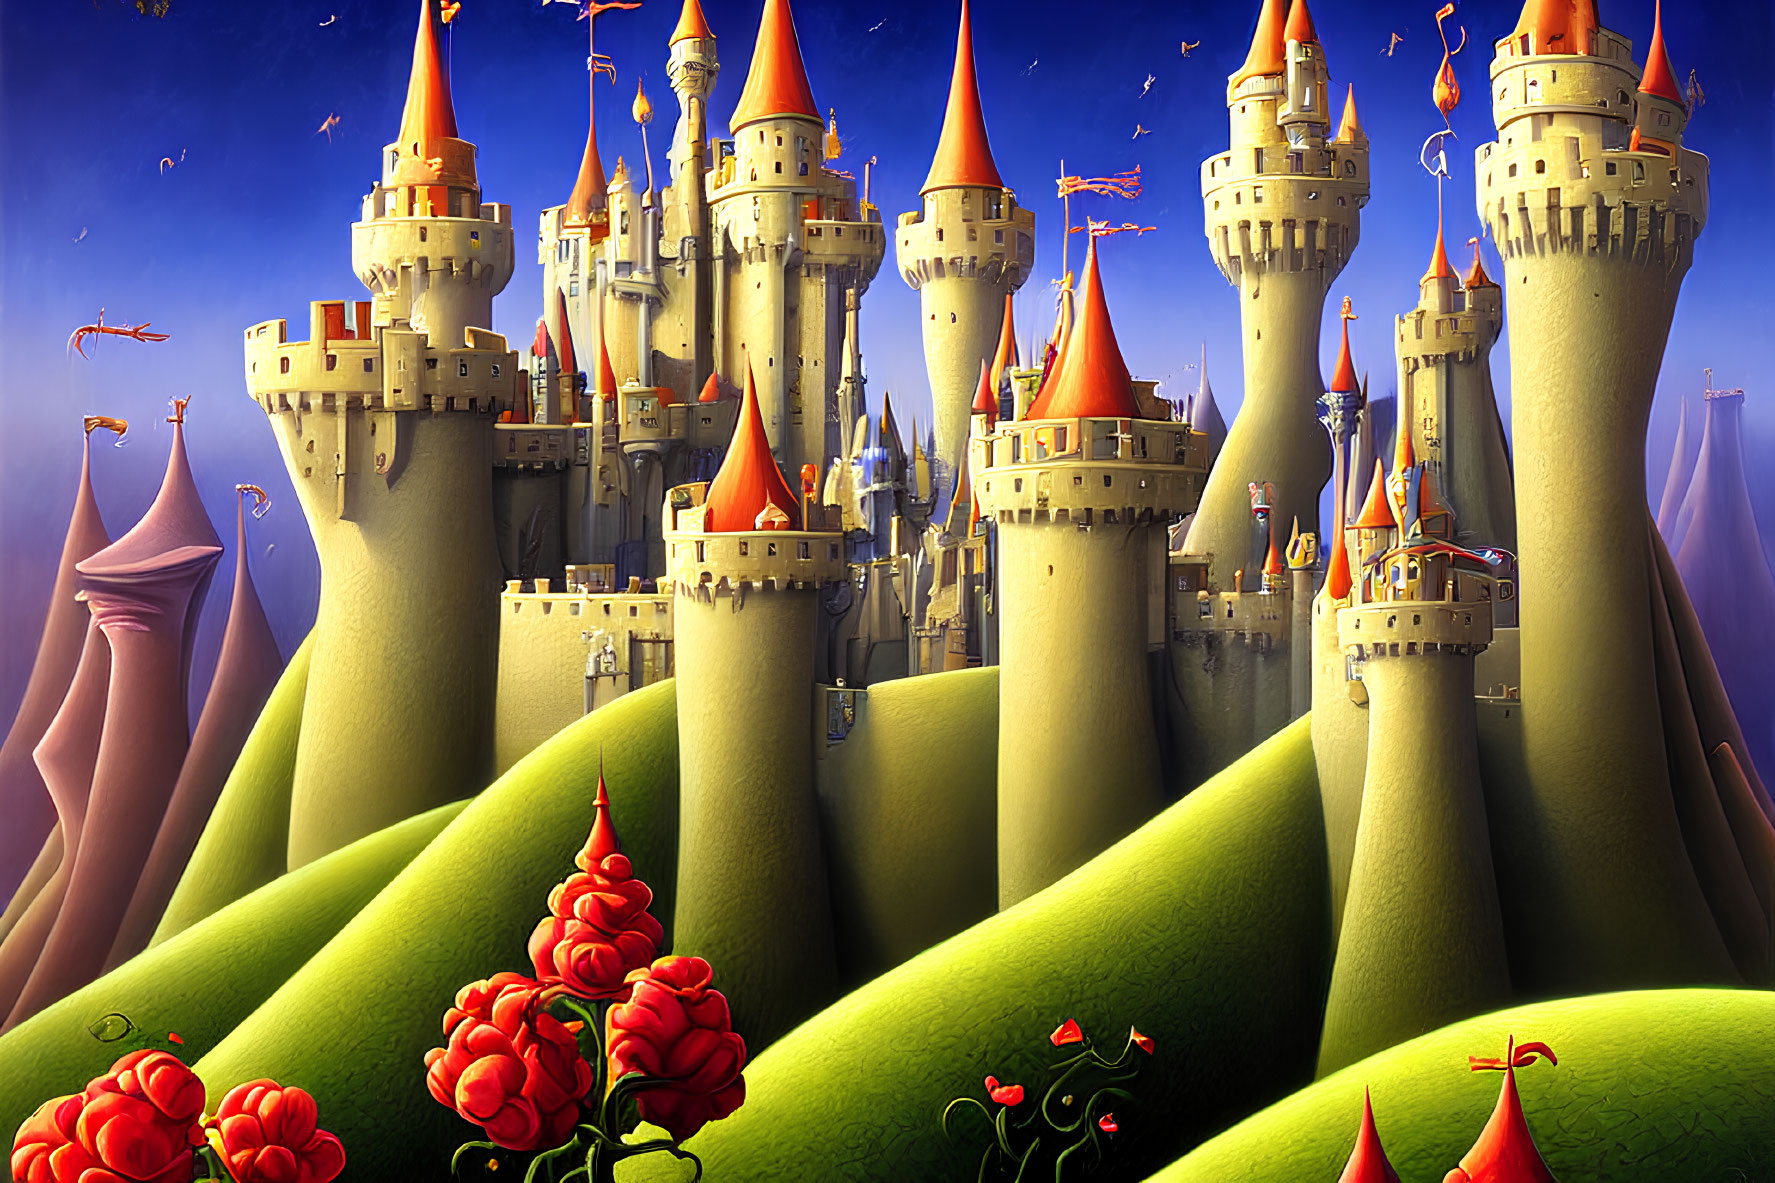 Colorful Fantasy Castle with Towering Spires and Red Roses